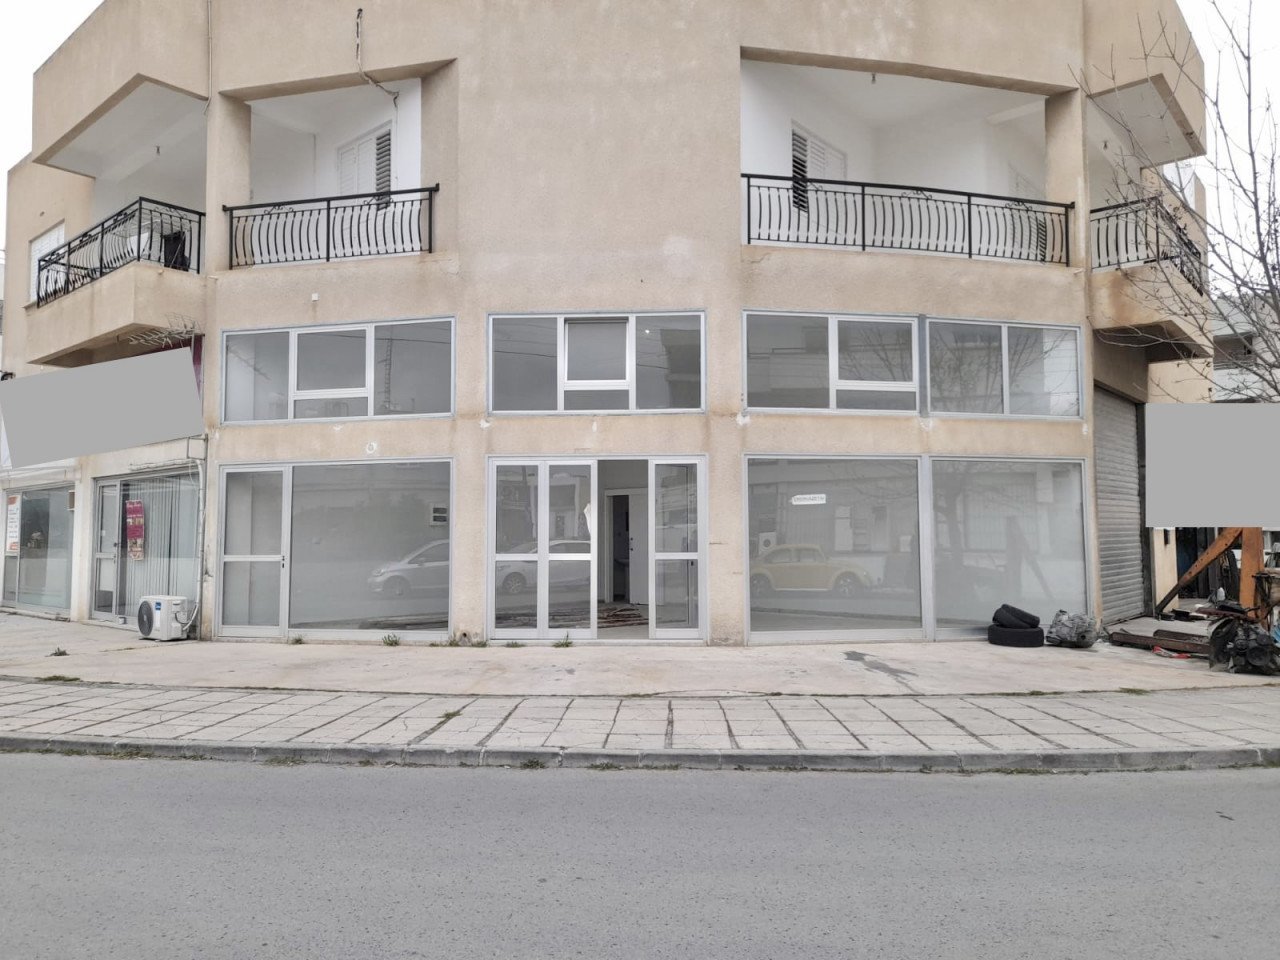 For Sale: Commercial (Shop) in Strovolos, Nicosia for Rent | Key Realtor Cyprus